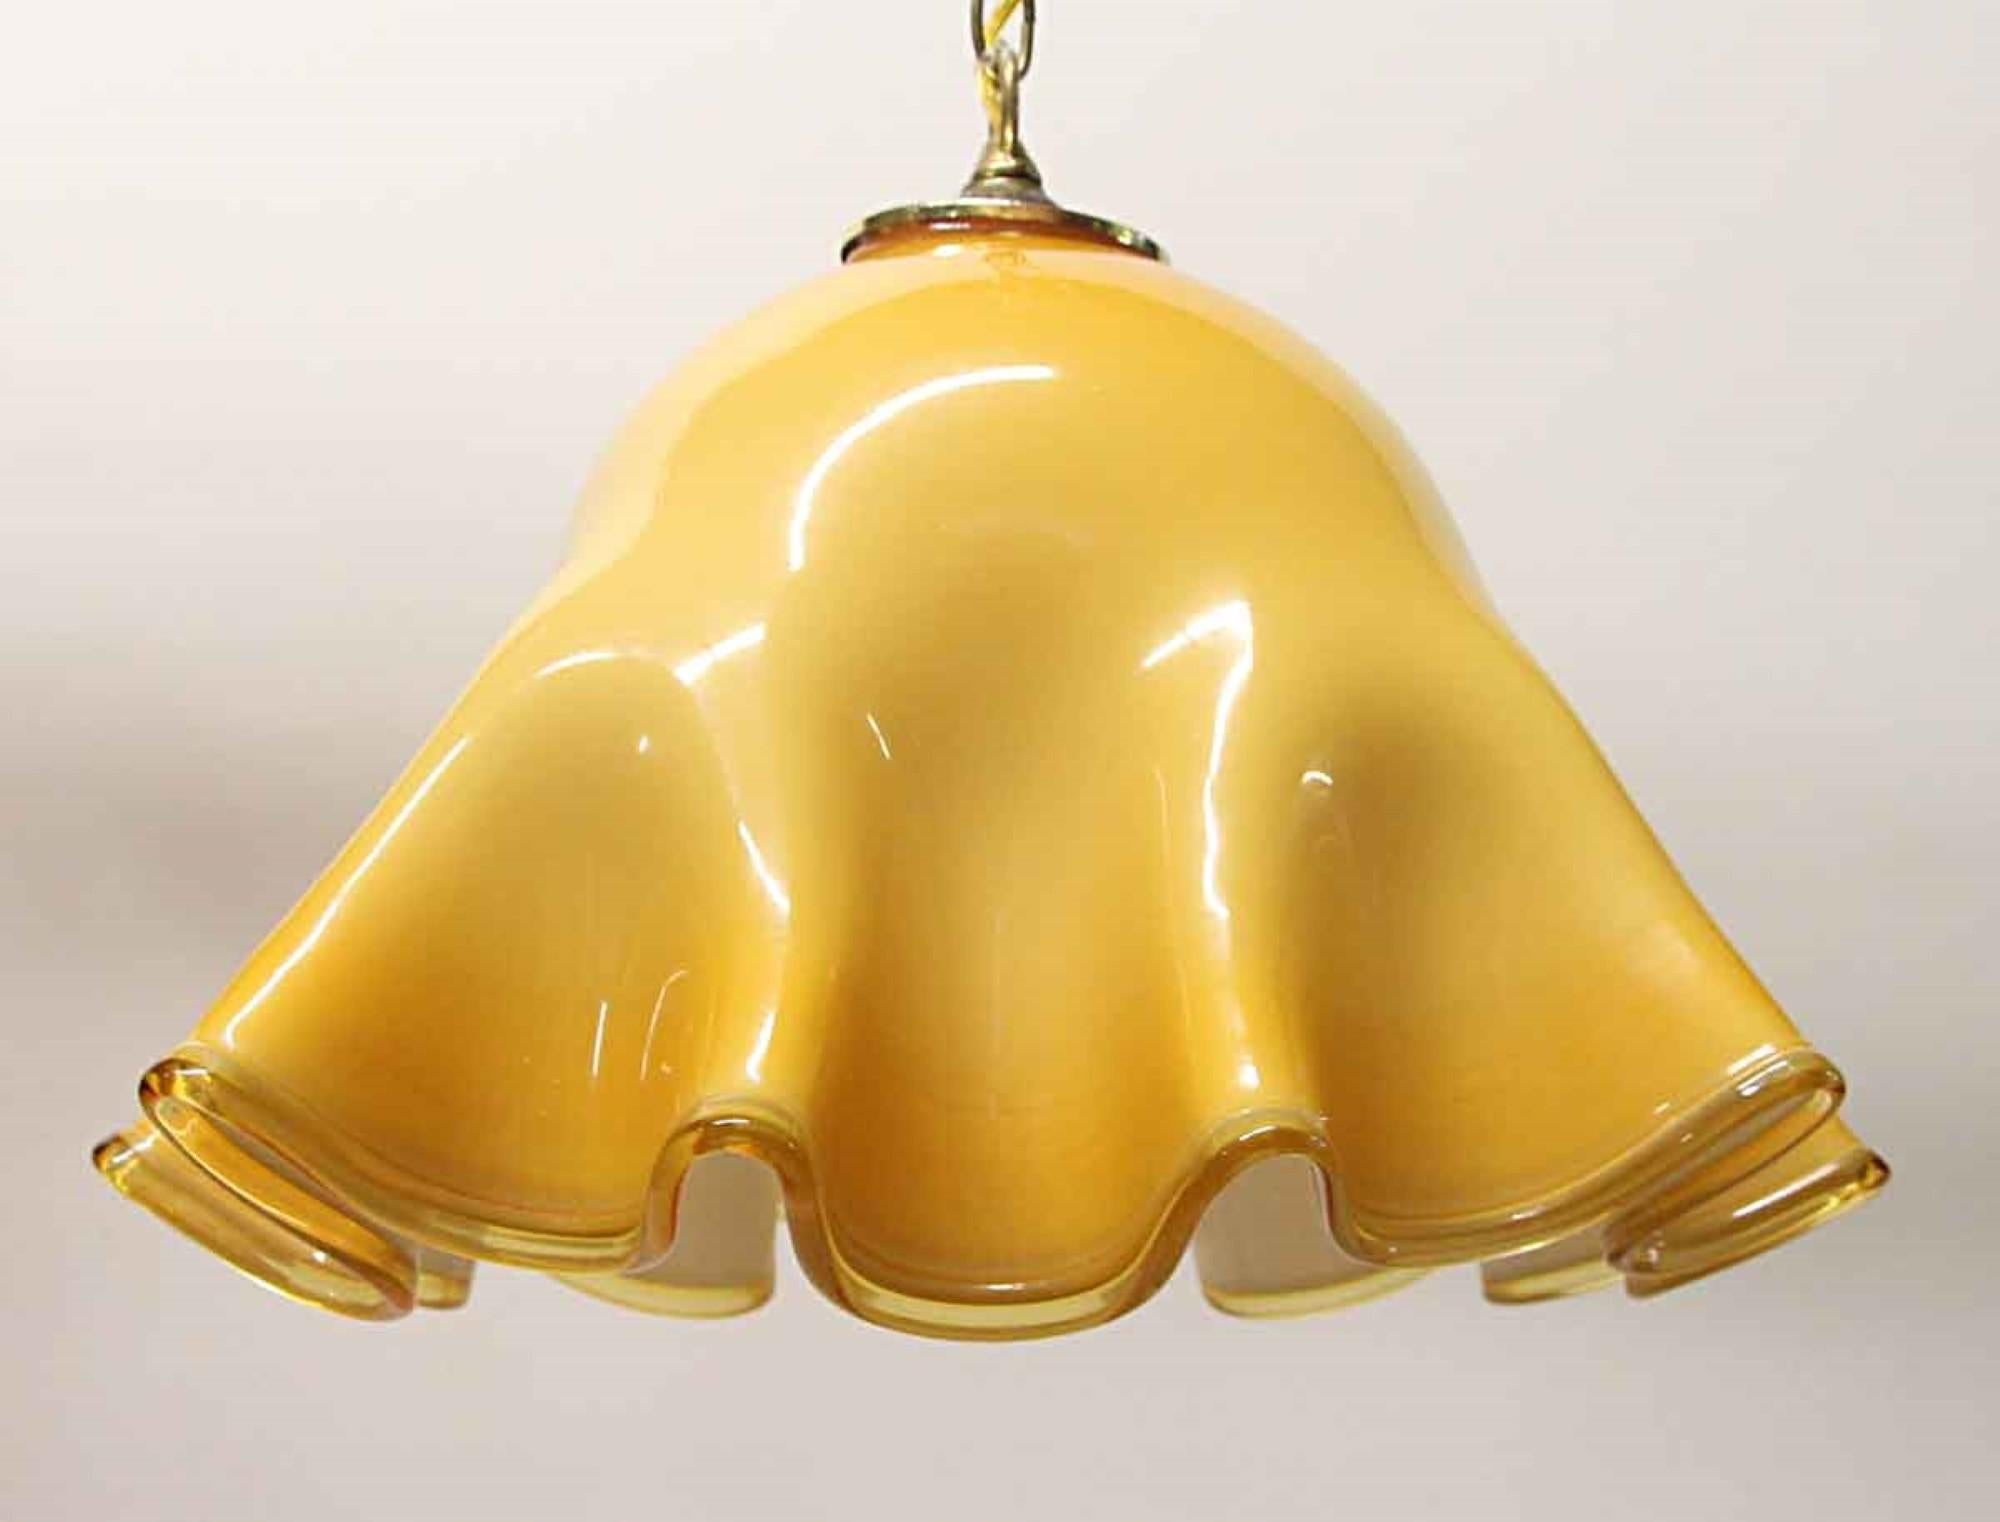 Modern yellow Murano glass ruffled brass pendant light. Comes with brass hardware. This can be seen at our 400 Gilligan St location in Scranton, PA.